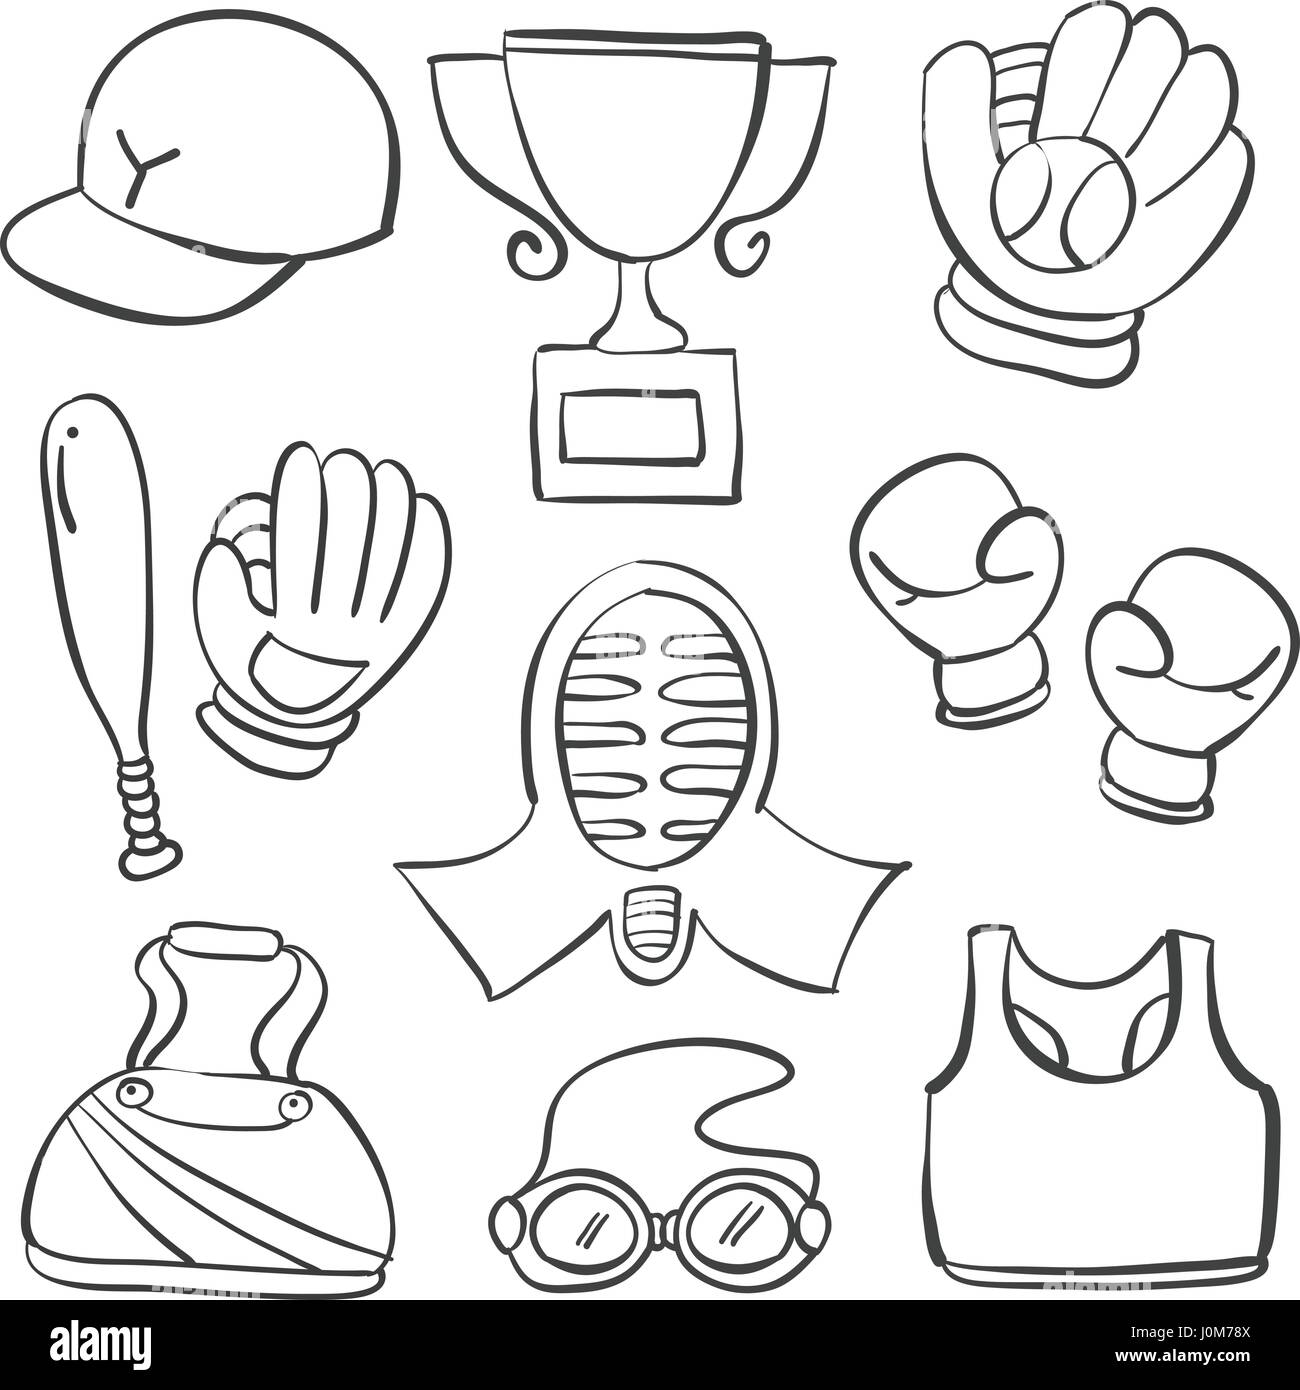 Sport equipment hand Stock Vector Images - Page 2 - Alamy